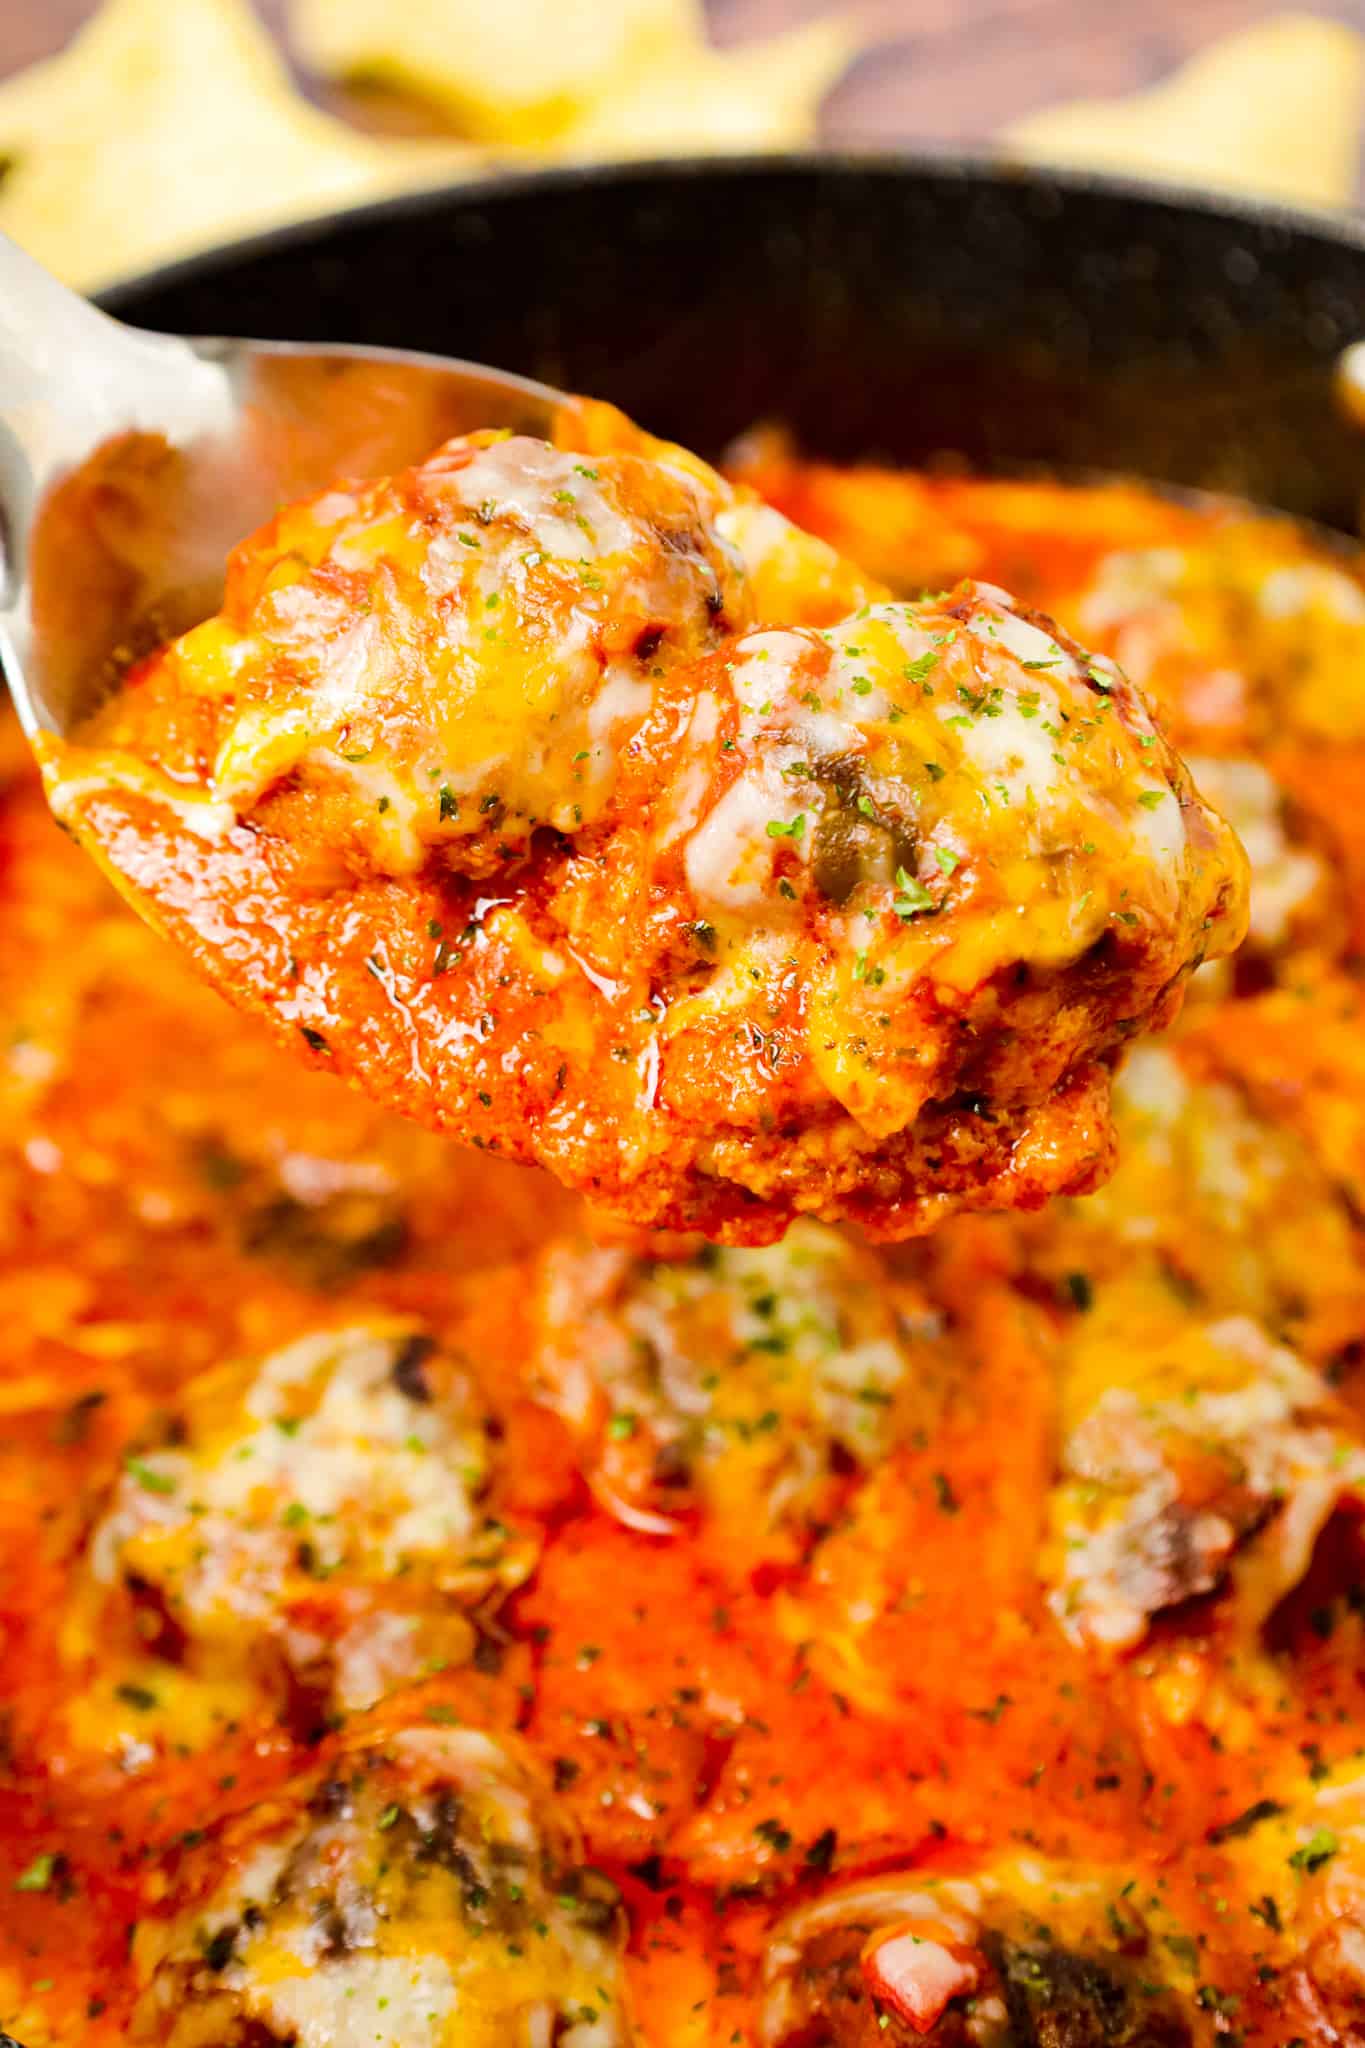 Tex Mex Meatballs are an easy dinner recipe made with ground beef, crushed corn chips, taco seasoning and cheese cooked in a sauce made with tomato sauce and salsa.